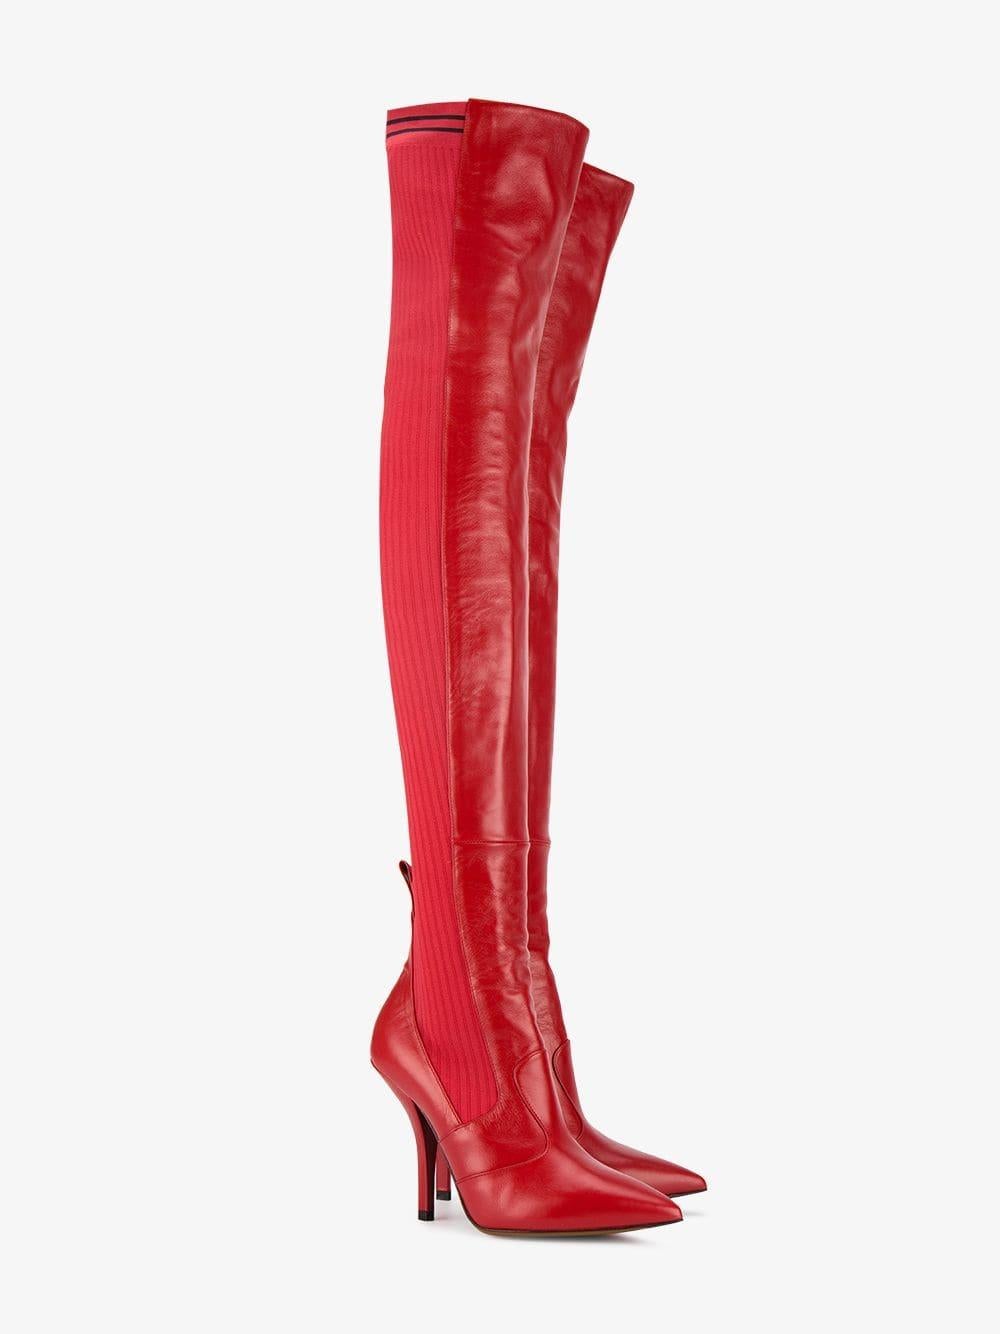 Fendi NEW Runway Red Leather Knit Sock Thigh High Evening Heels Boots  2